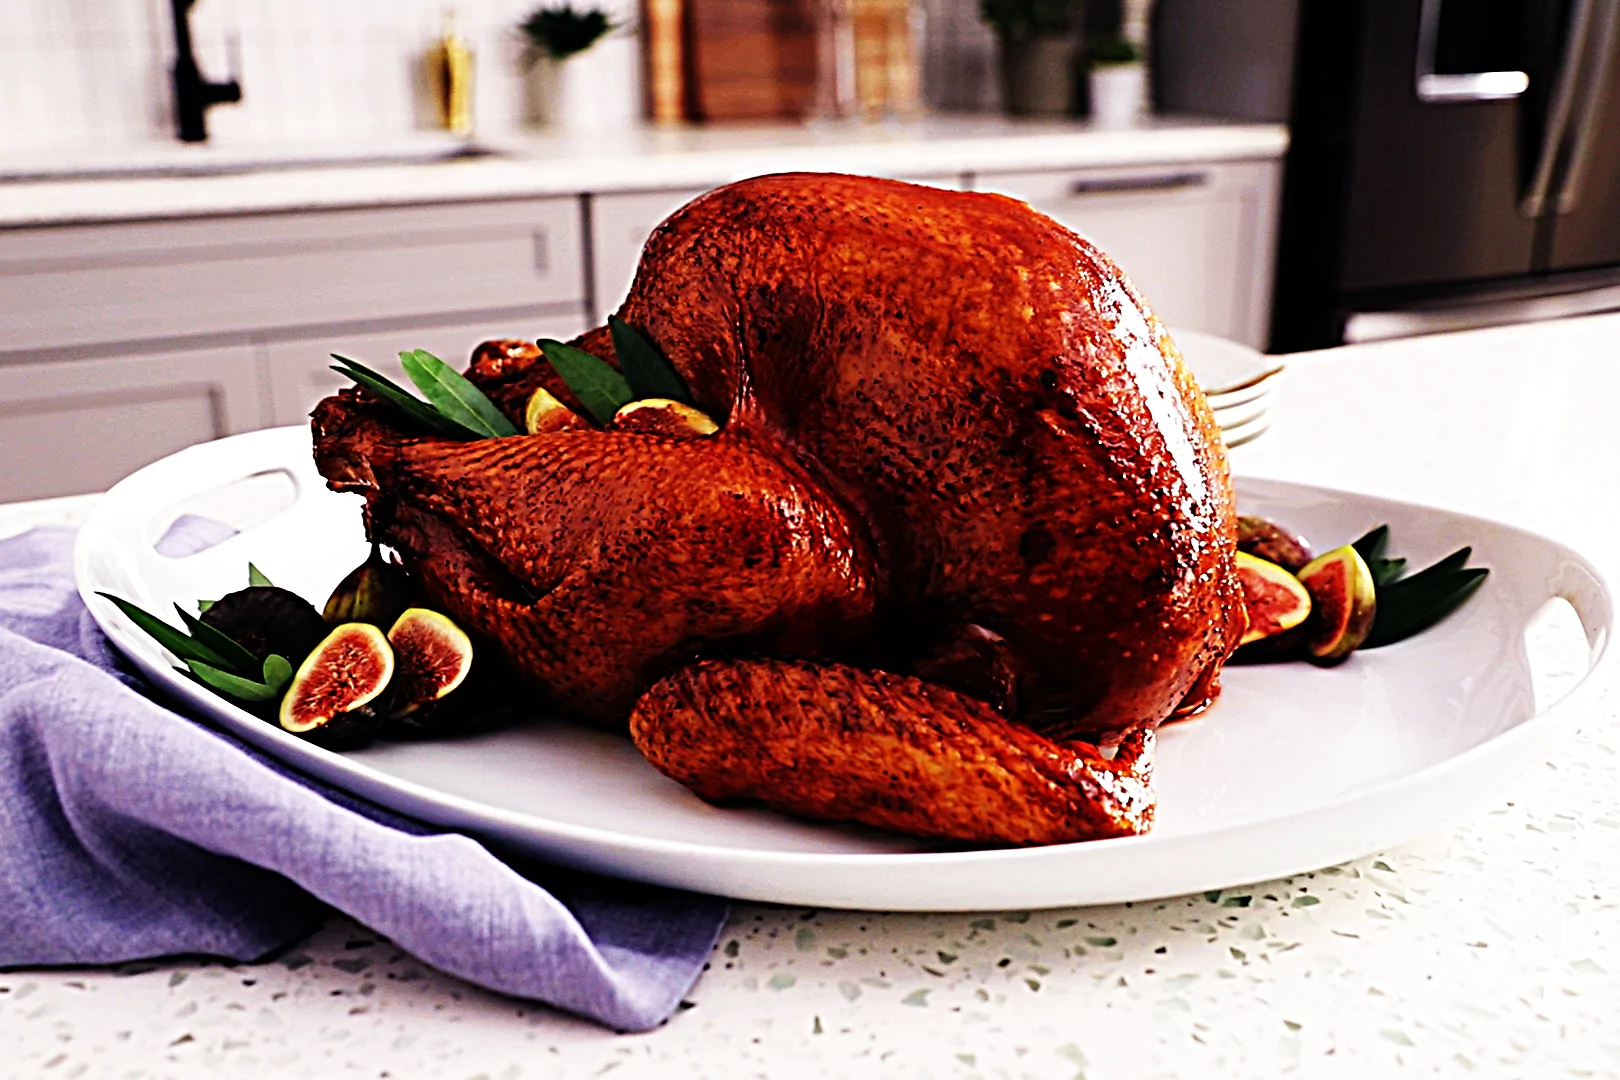 Stupid-Easy Recipe for Thanksgiving Roasted Turkey with Stuffing (#1 Top-Rated)